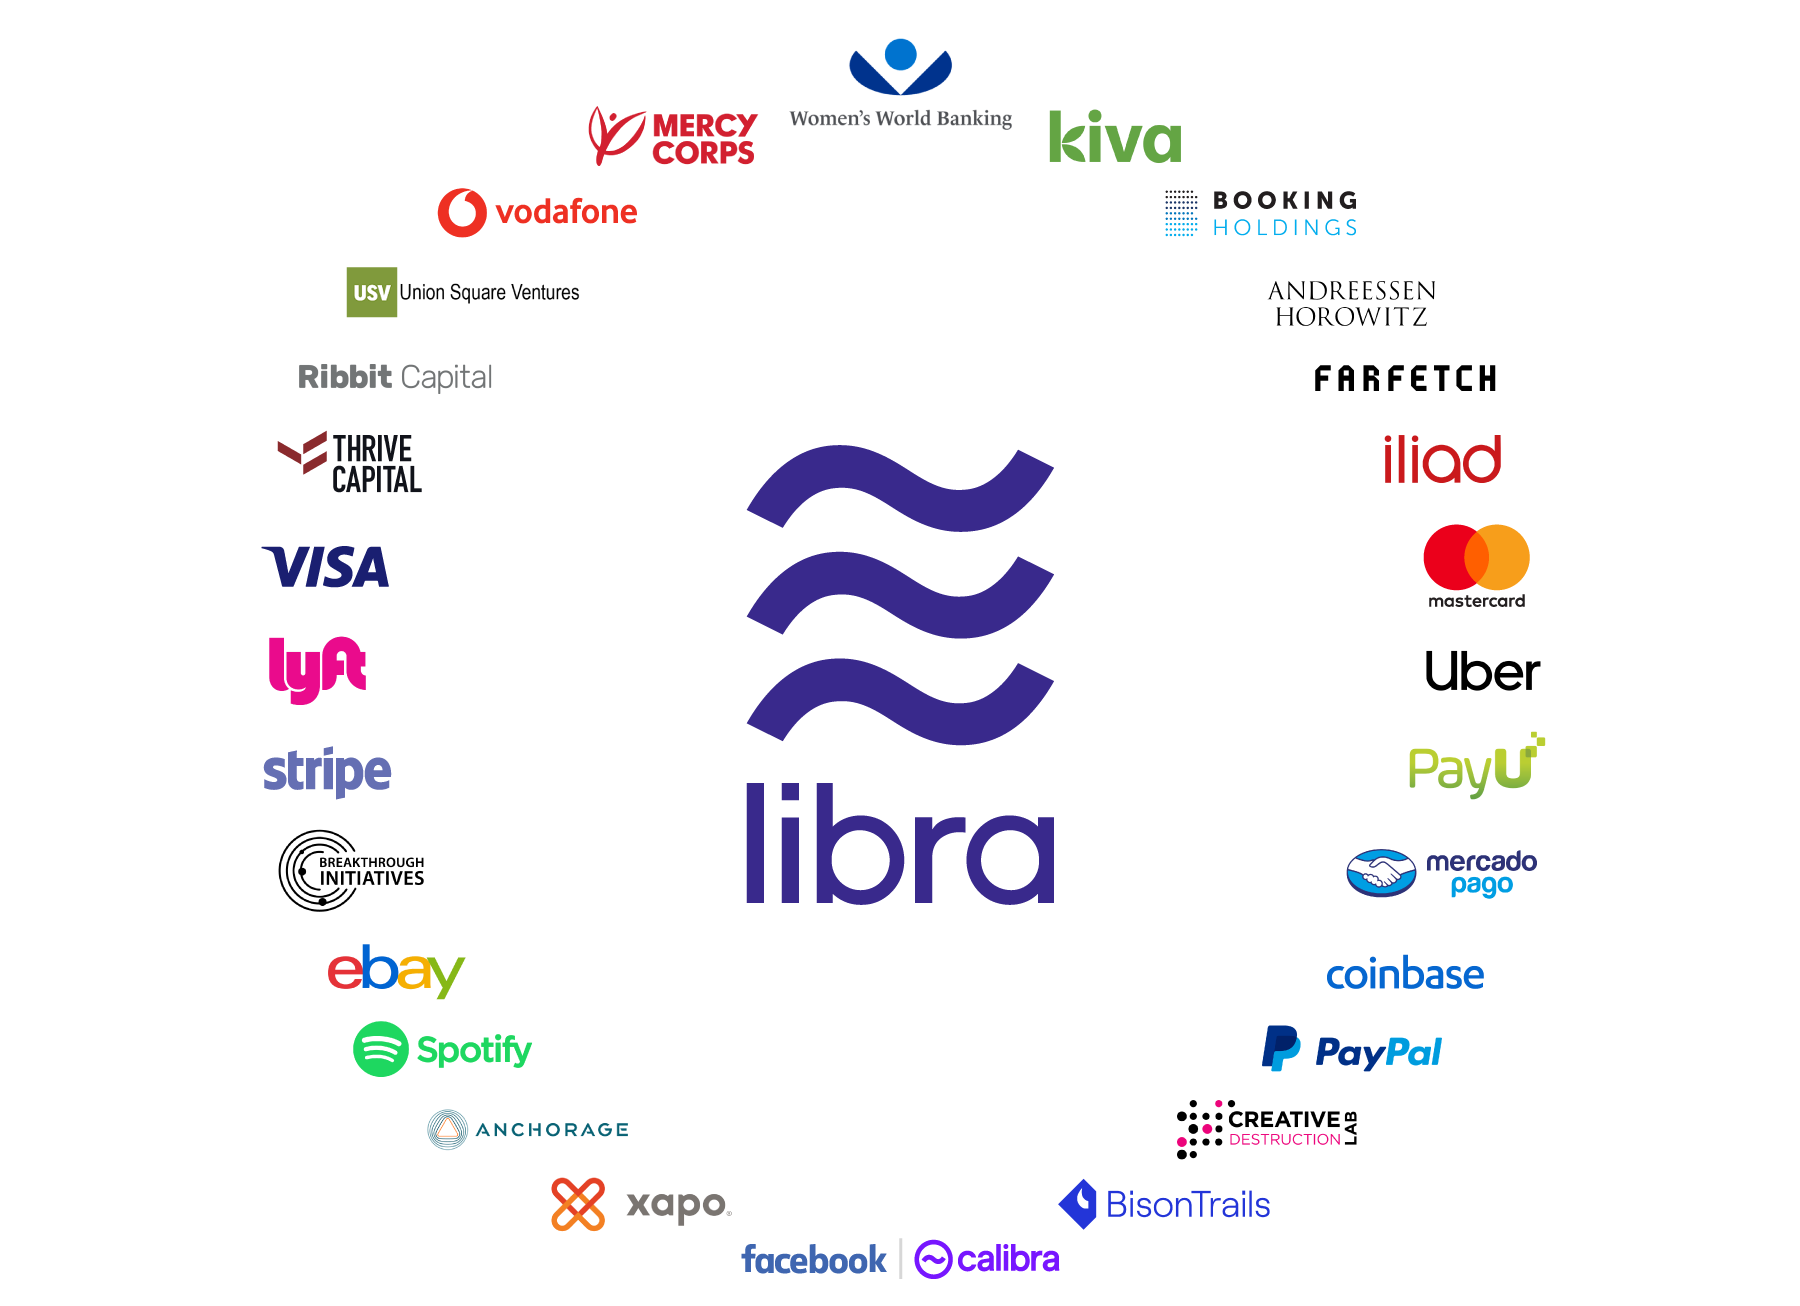 Libra is not Facebook Coin, and its damned near perfect